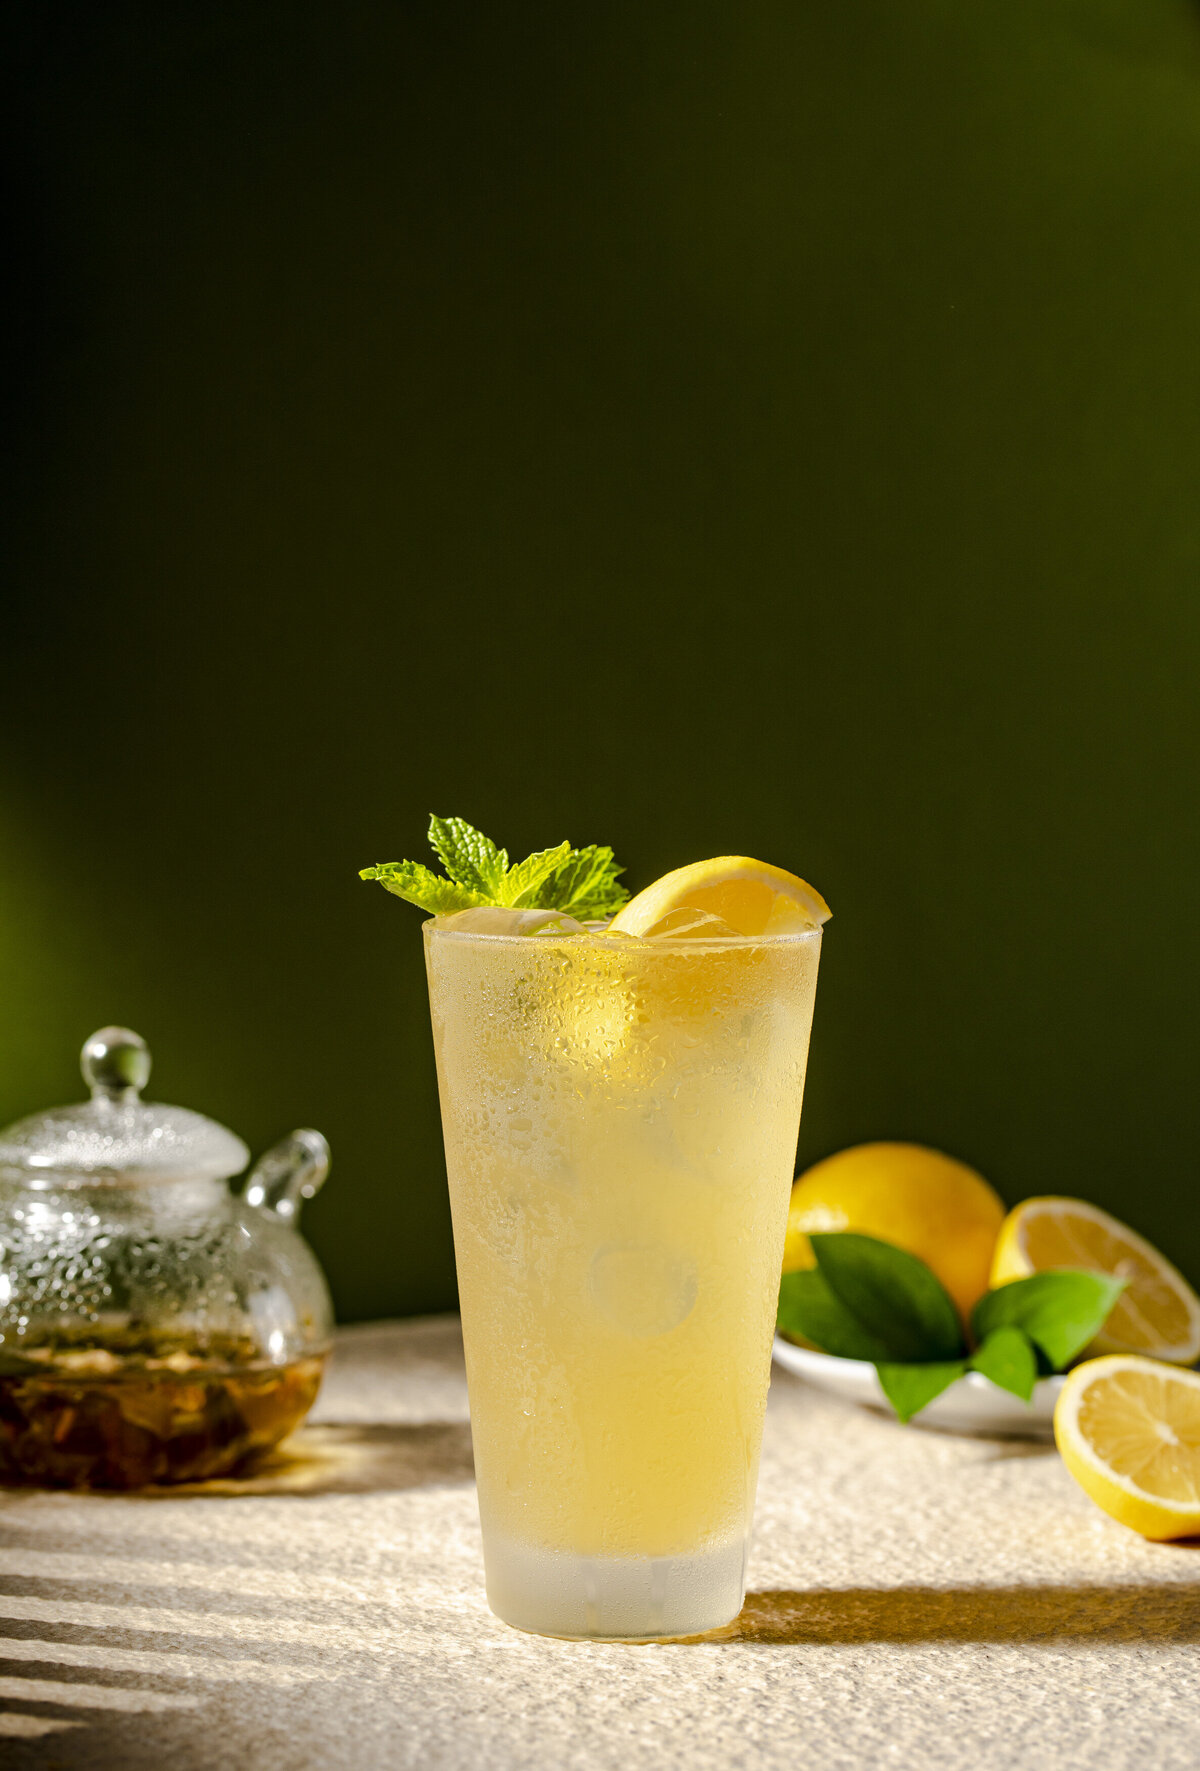 A tall glass of lemonade with mint on top.